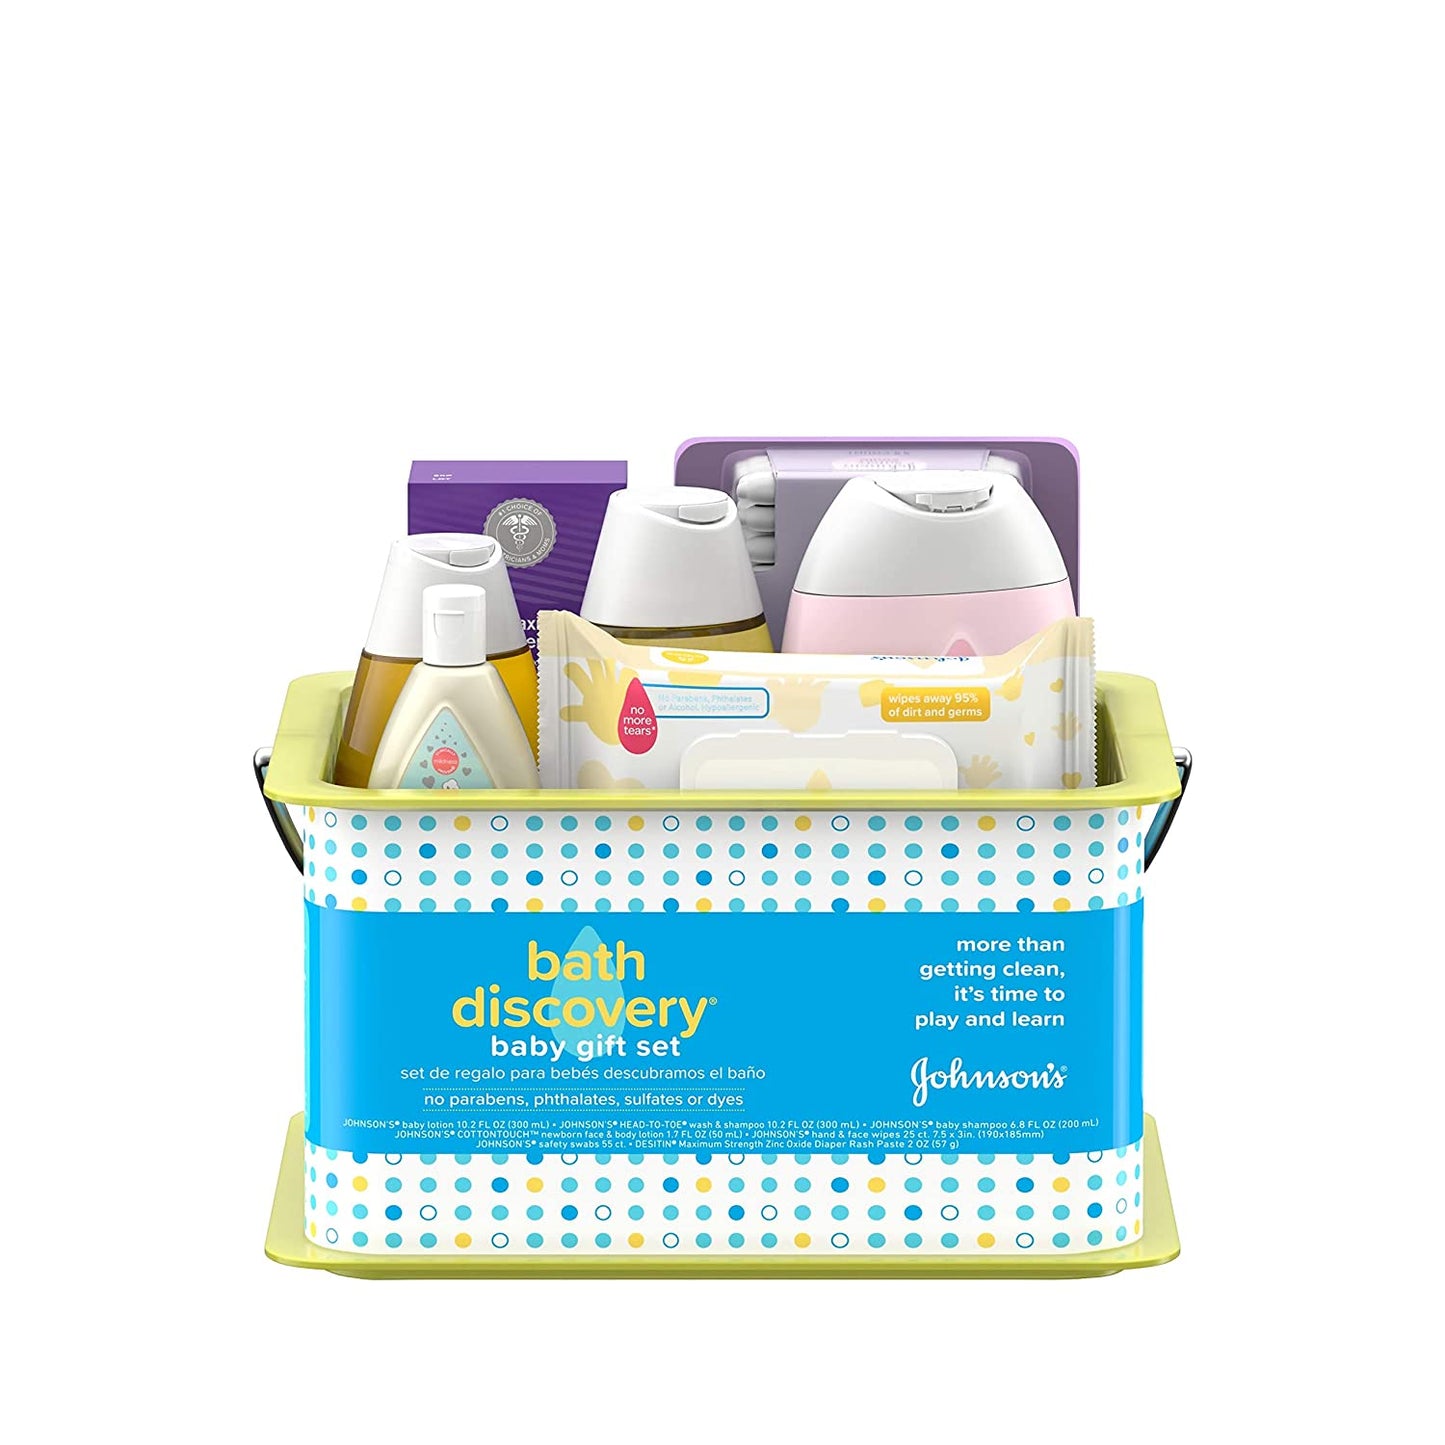 Johnson's Bath Discovery Gift Set for Parents-to-Be